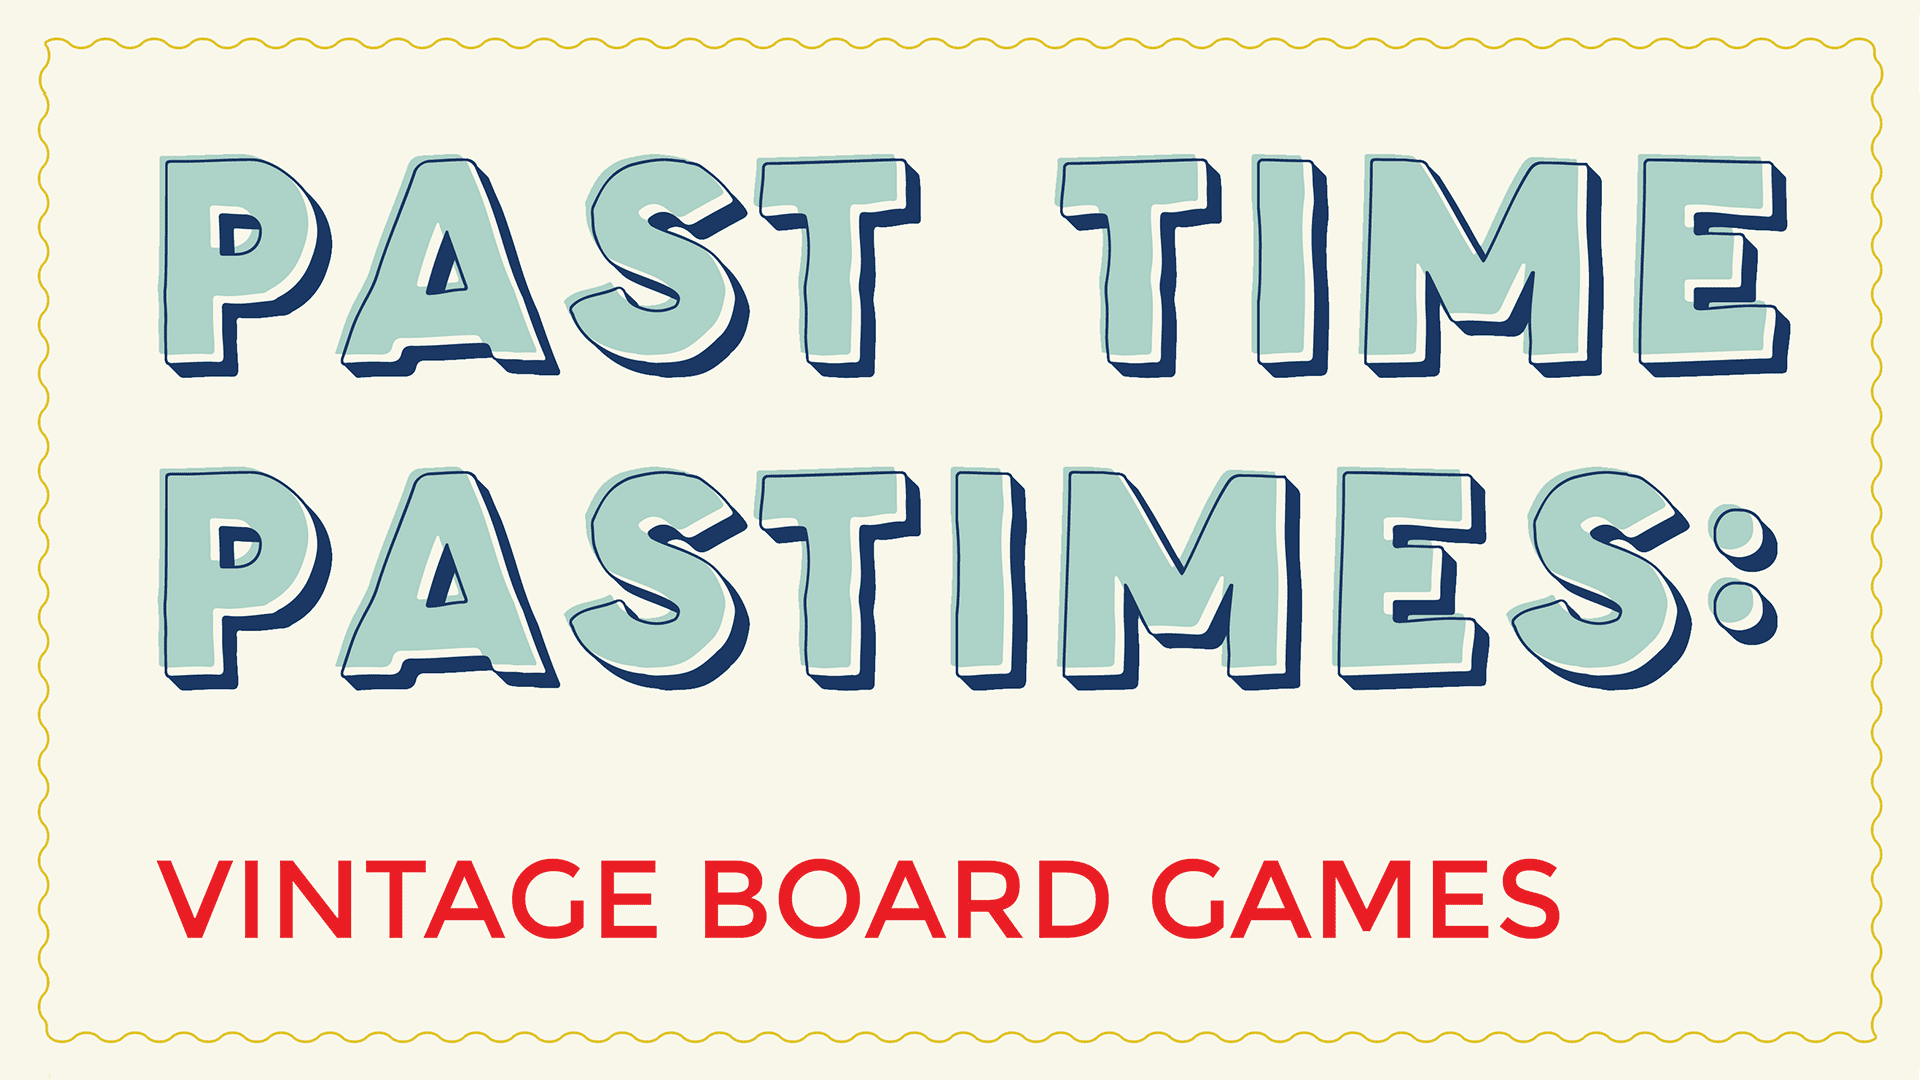 Past Time Pastimes: Vintage Board Games heading